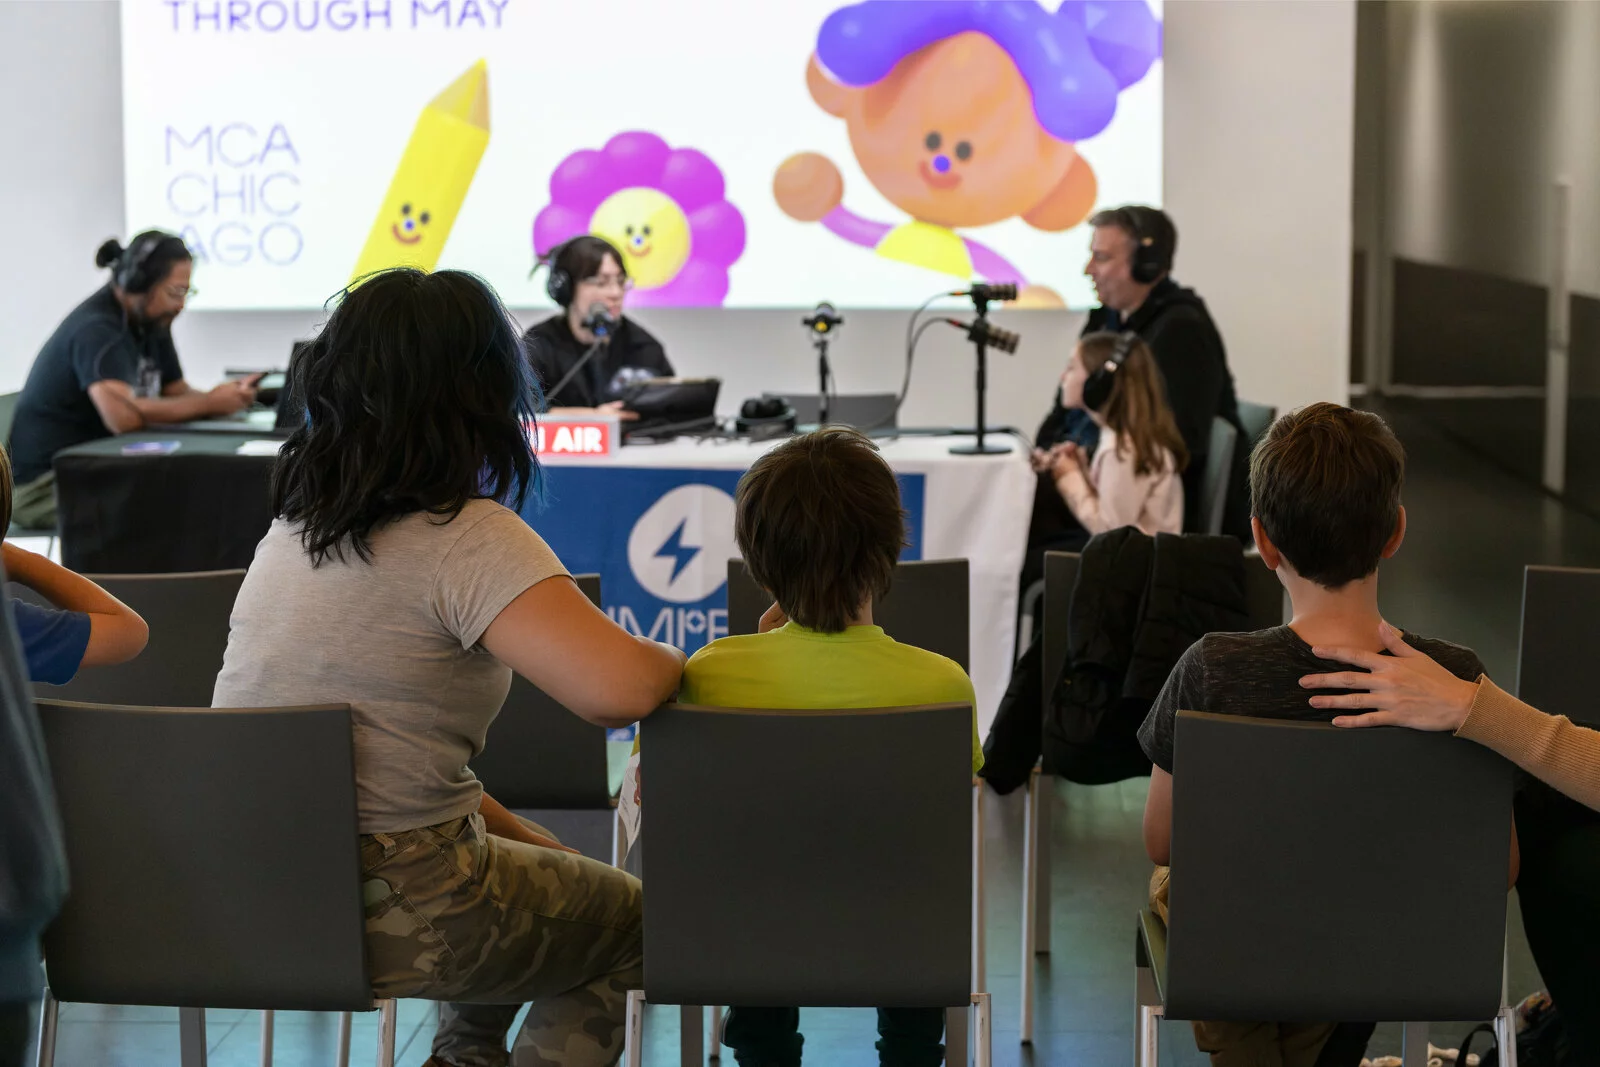 A group of people sit watching a live radio show.